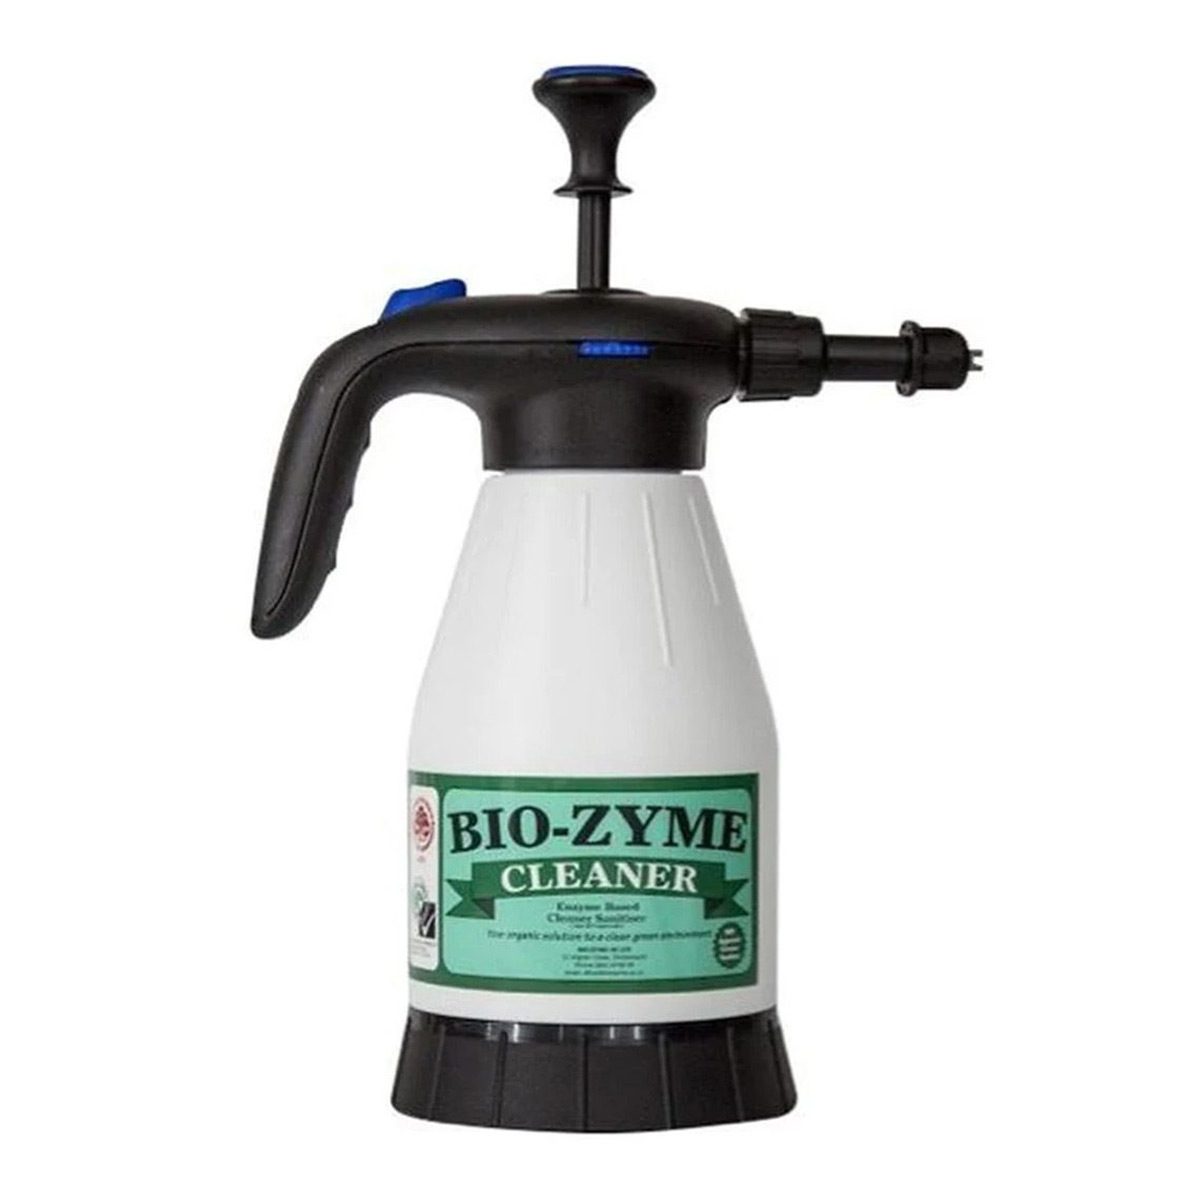 cleaning-products-environmental-bio-zyme-hand-held-foamer-enzyme-based-foam-cleaner-sanitiser-dispenser-foaming-nozzle-1500ml-vjs-distributors-900-2LHH